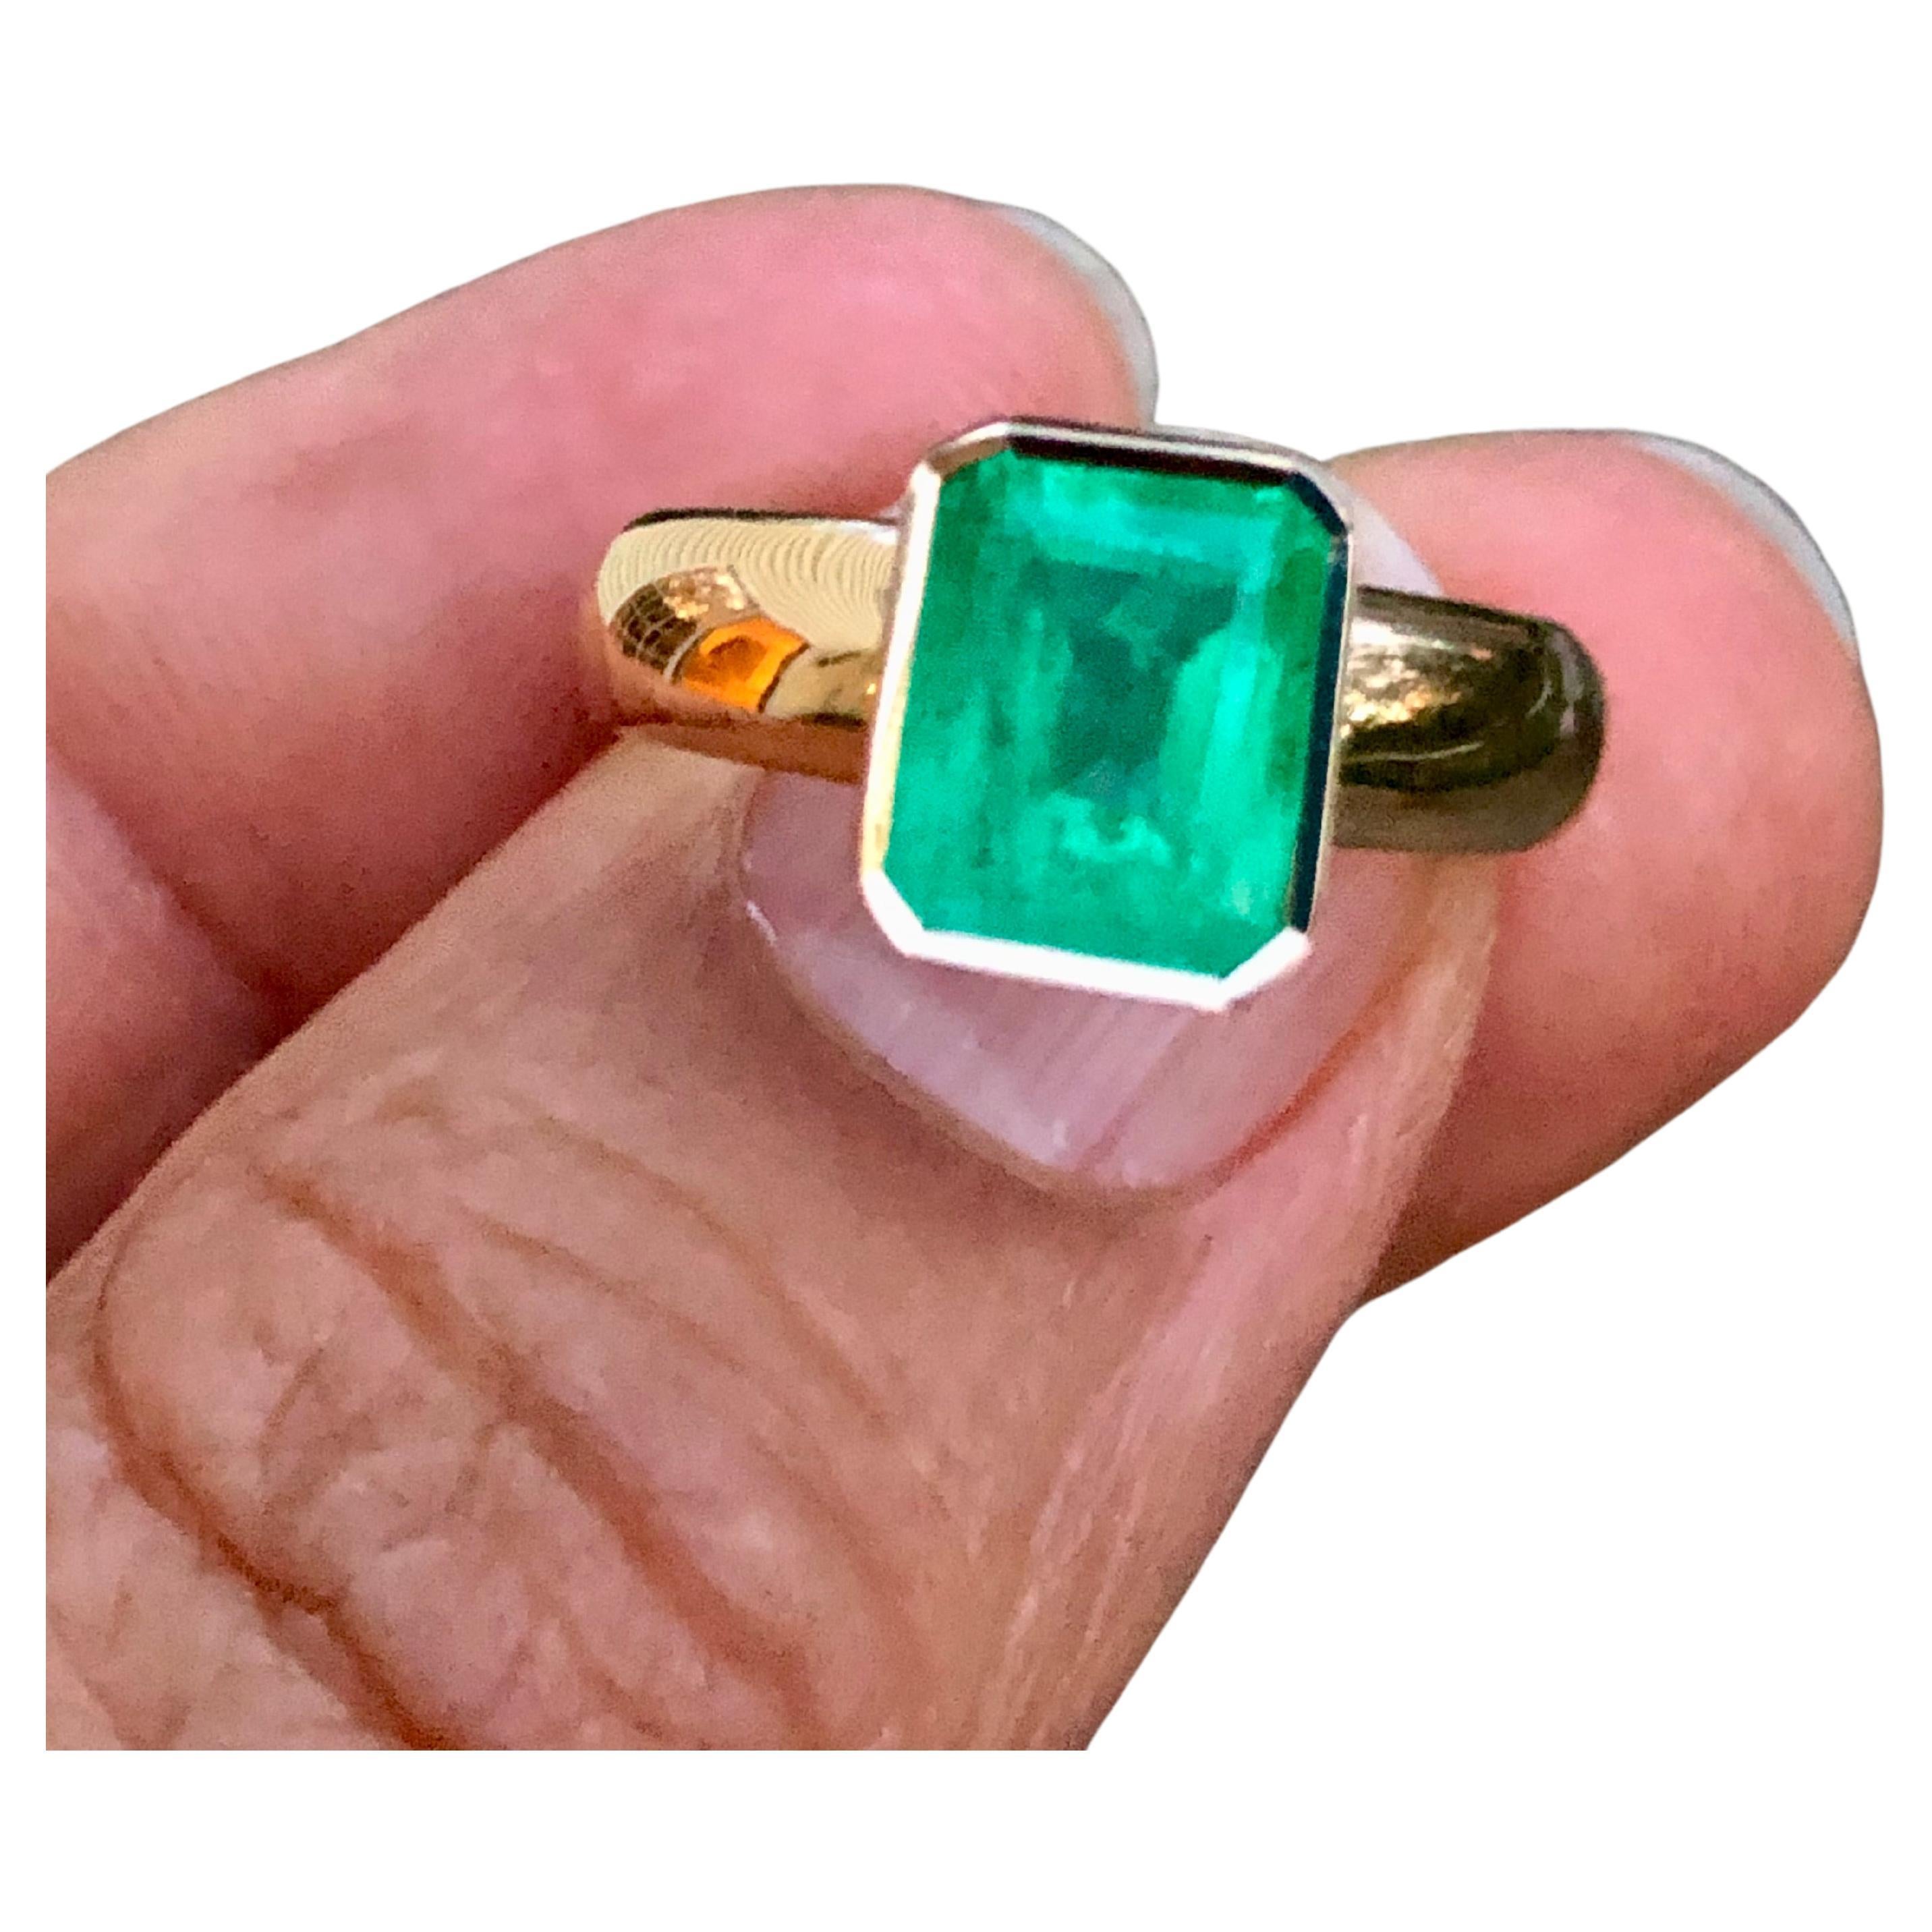 A stunning Natural Colombian Emerald with a nice brilliance, makes it a true classic emerald solitaire ring Primary Stone: 100% Natural Colombian Emerald 
Shape or Cut: Emerald Cut Emerald 
Weight: 2.68 Carats (1 emerald) 
Measurements Emerald: